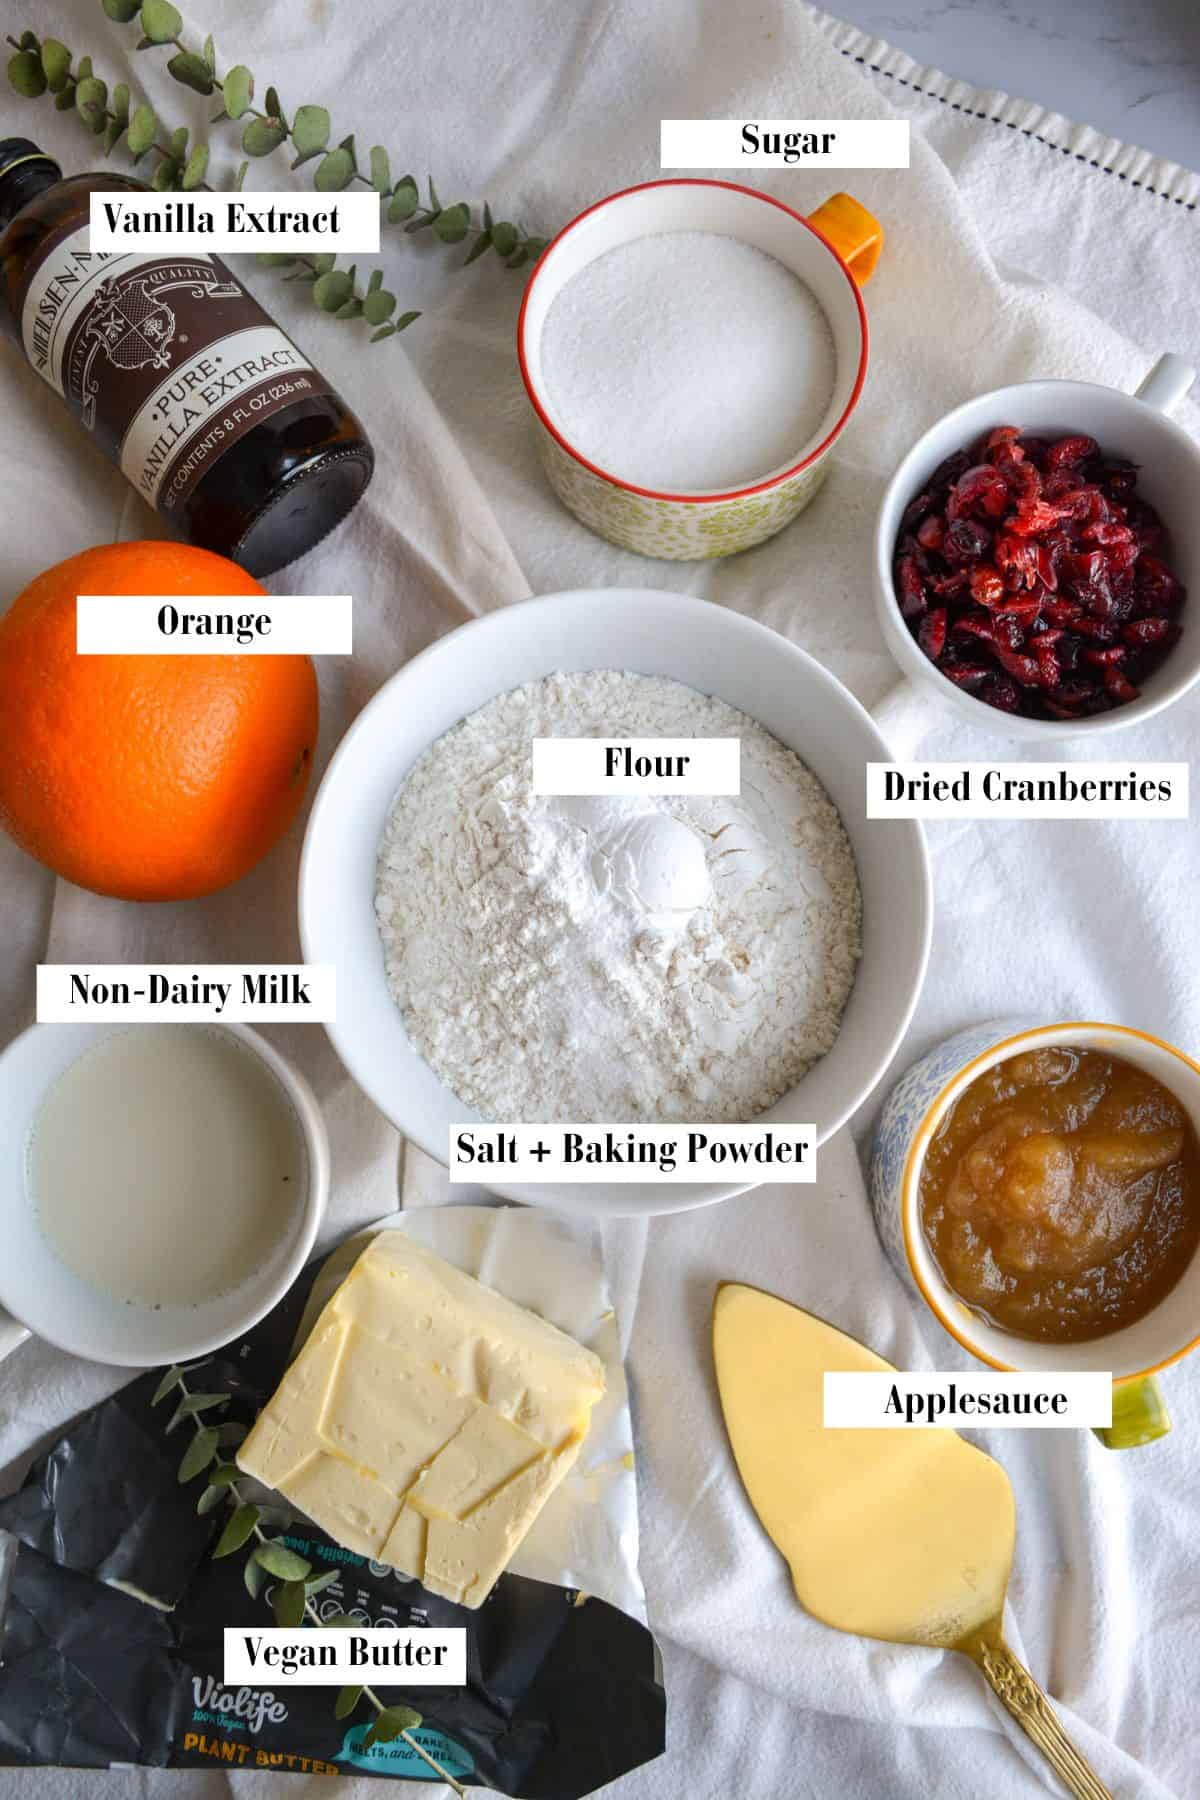 Overhead photo of ingredients needed to make the muffins.